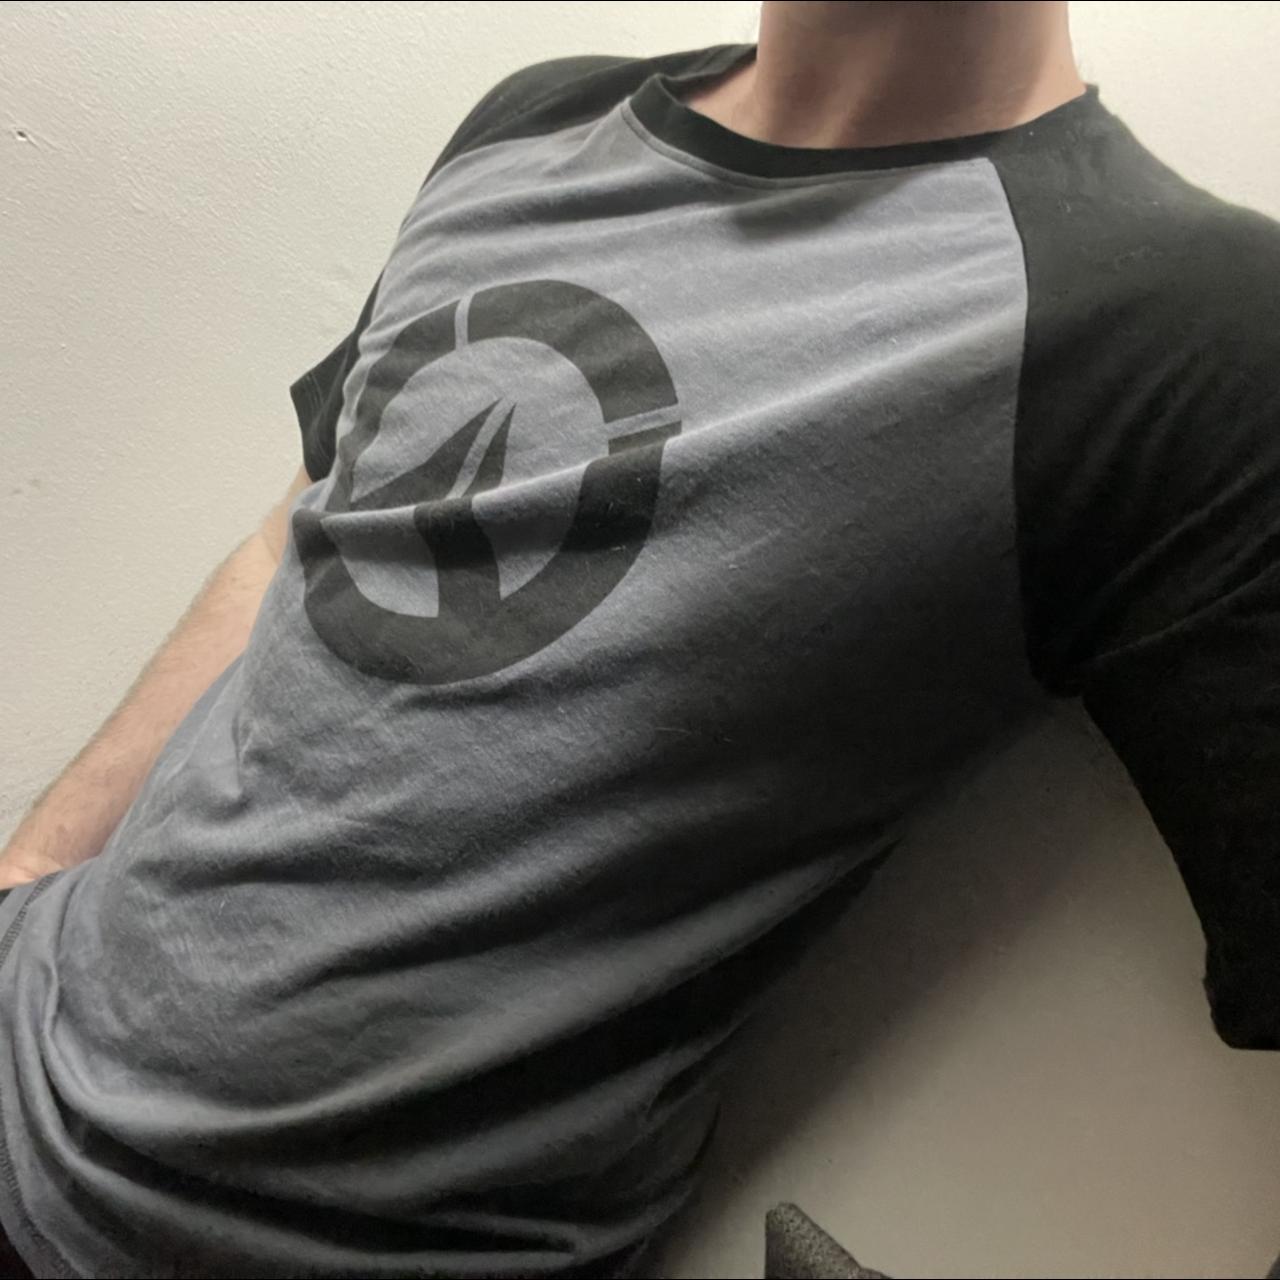 Product Image 2 - Overwatch logo black and grey